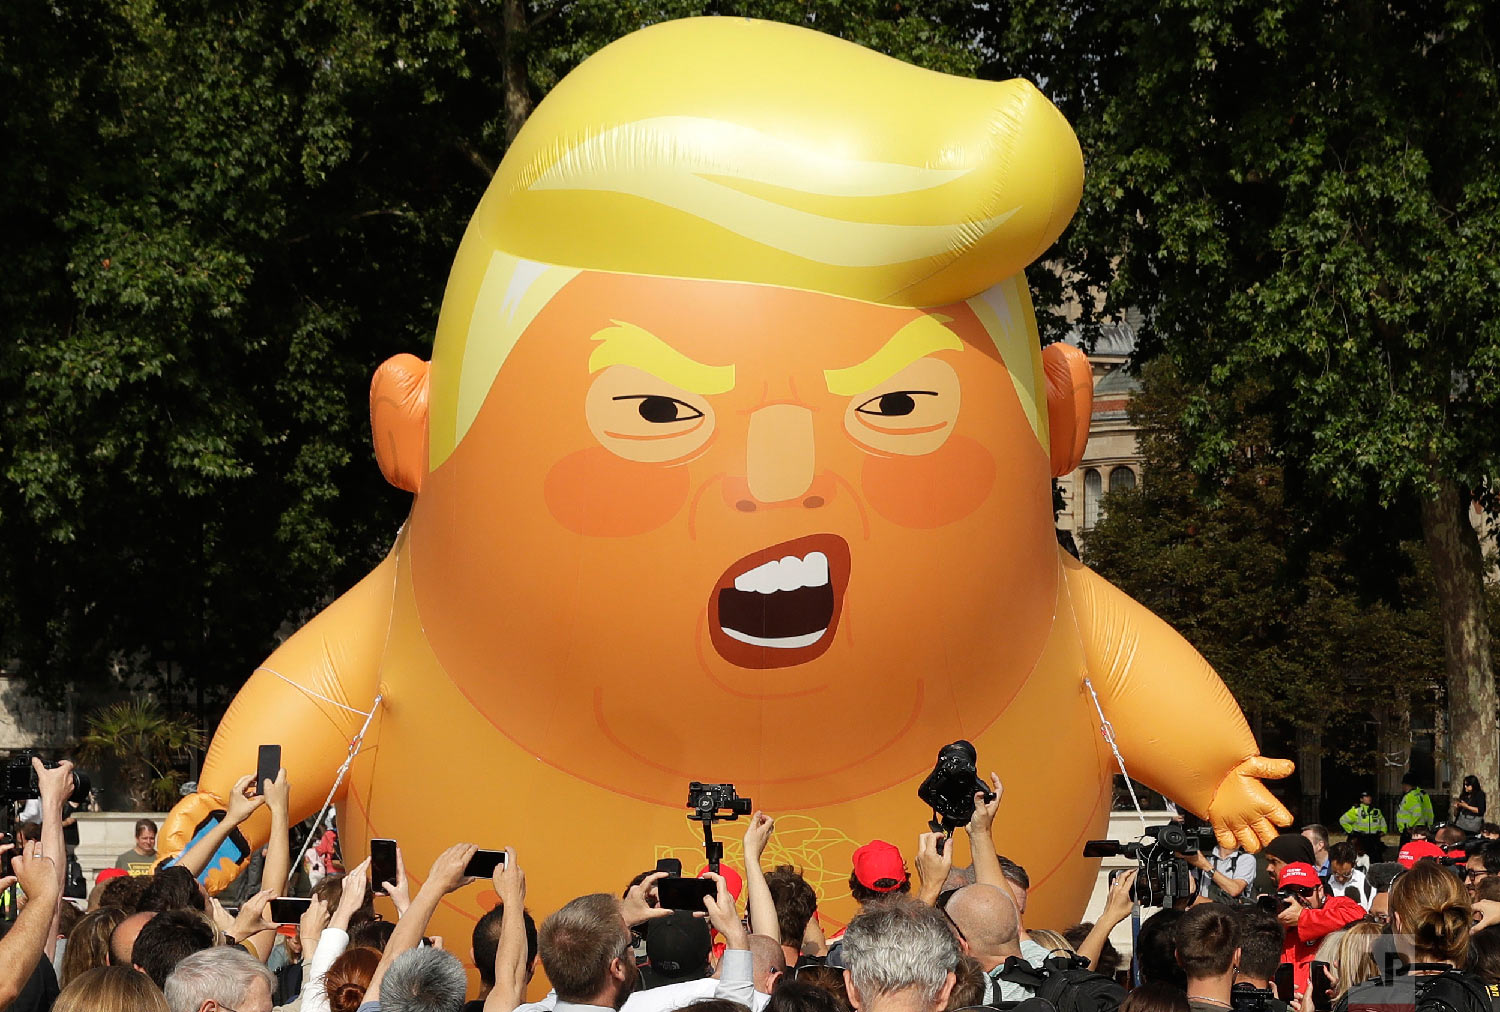  A six-meter high cartoon baby blimp of U.S. President Donald Trump is flown as a protest against his visit, in Parliament Square in London, England on July 13, 2018. (AP Photo/Matt Dunham) 